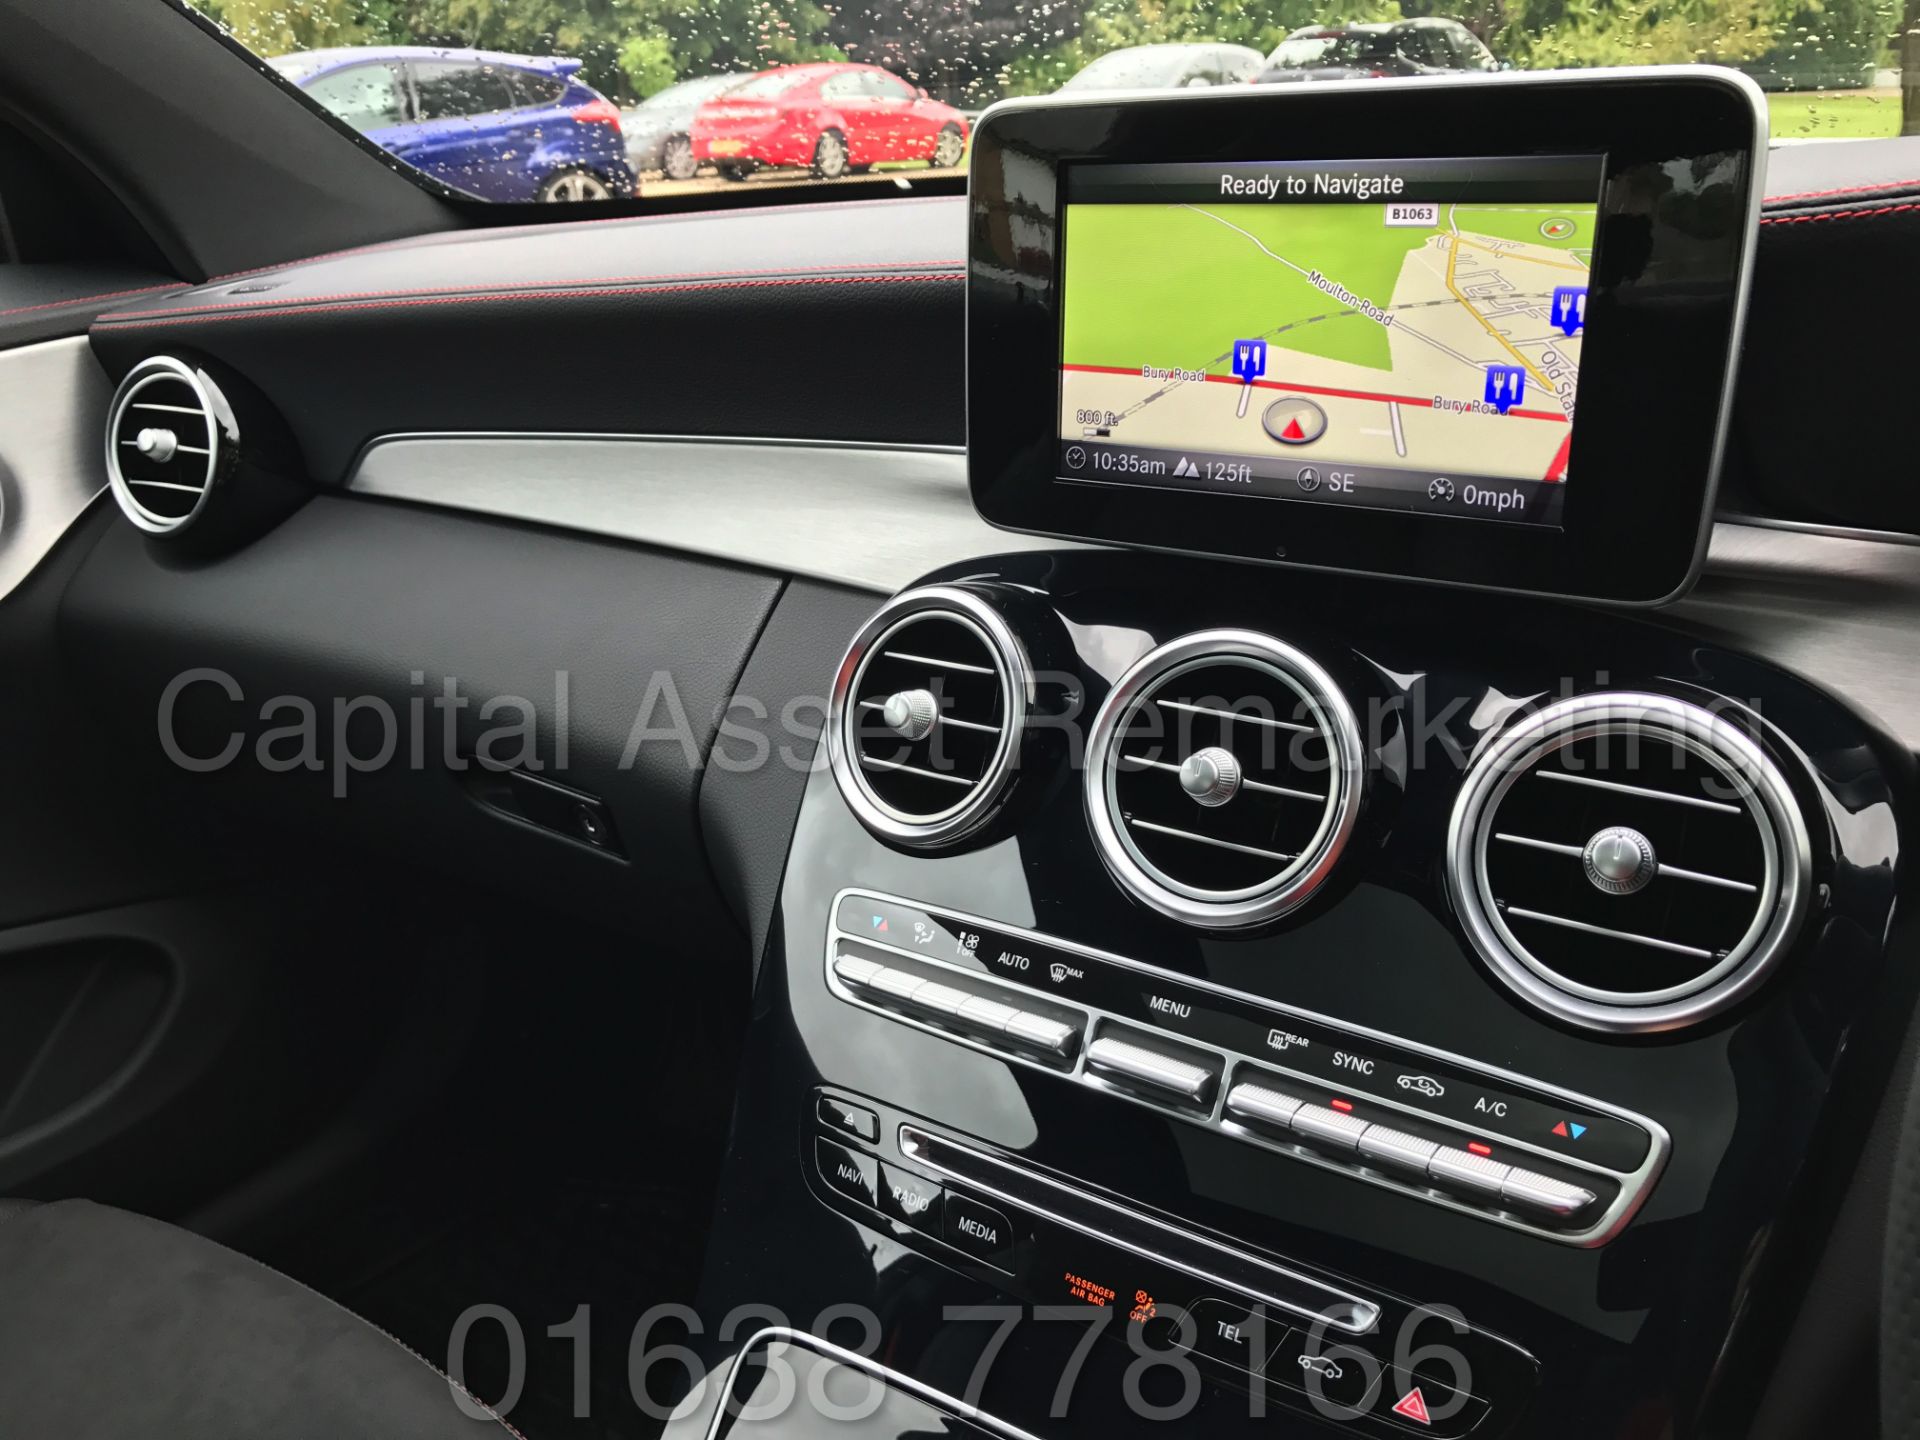 MEREDES-BENZ C43 AMG PREMIUM '4 MATIC' COUPE (2017) '9-G AUTO - LEATHER - SAT NAV' **FULLY LOADED** - Image 41 of 57